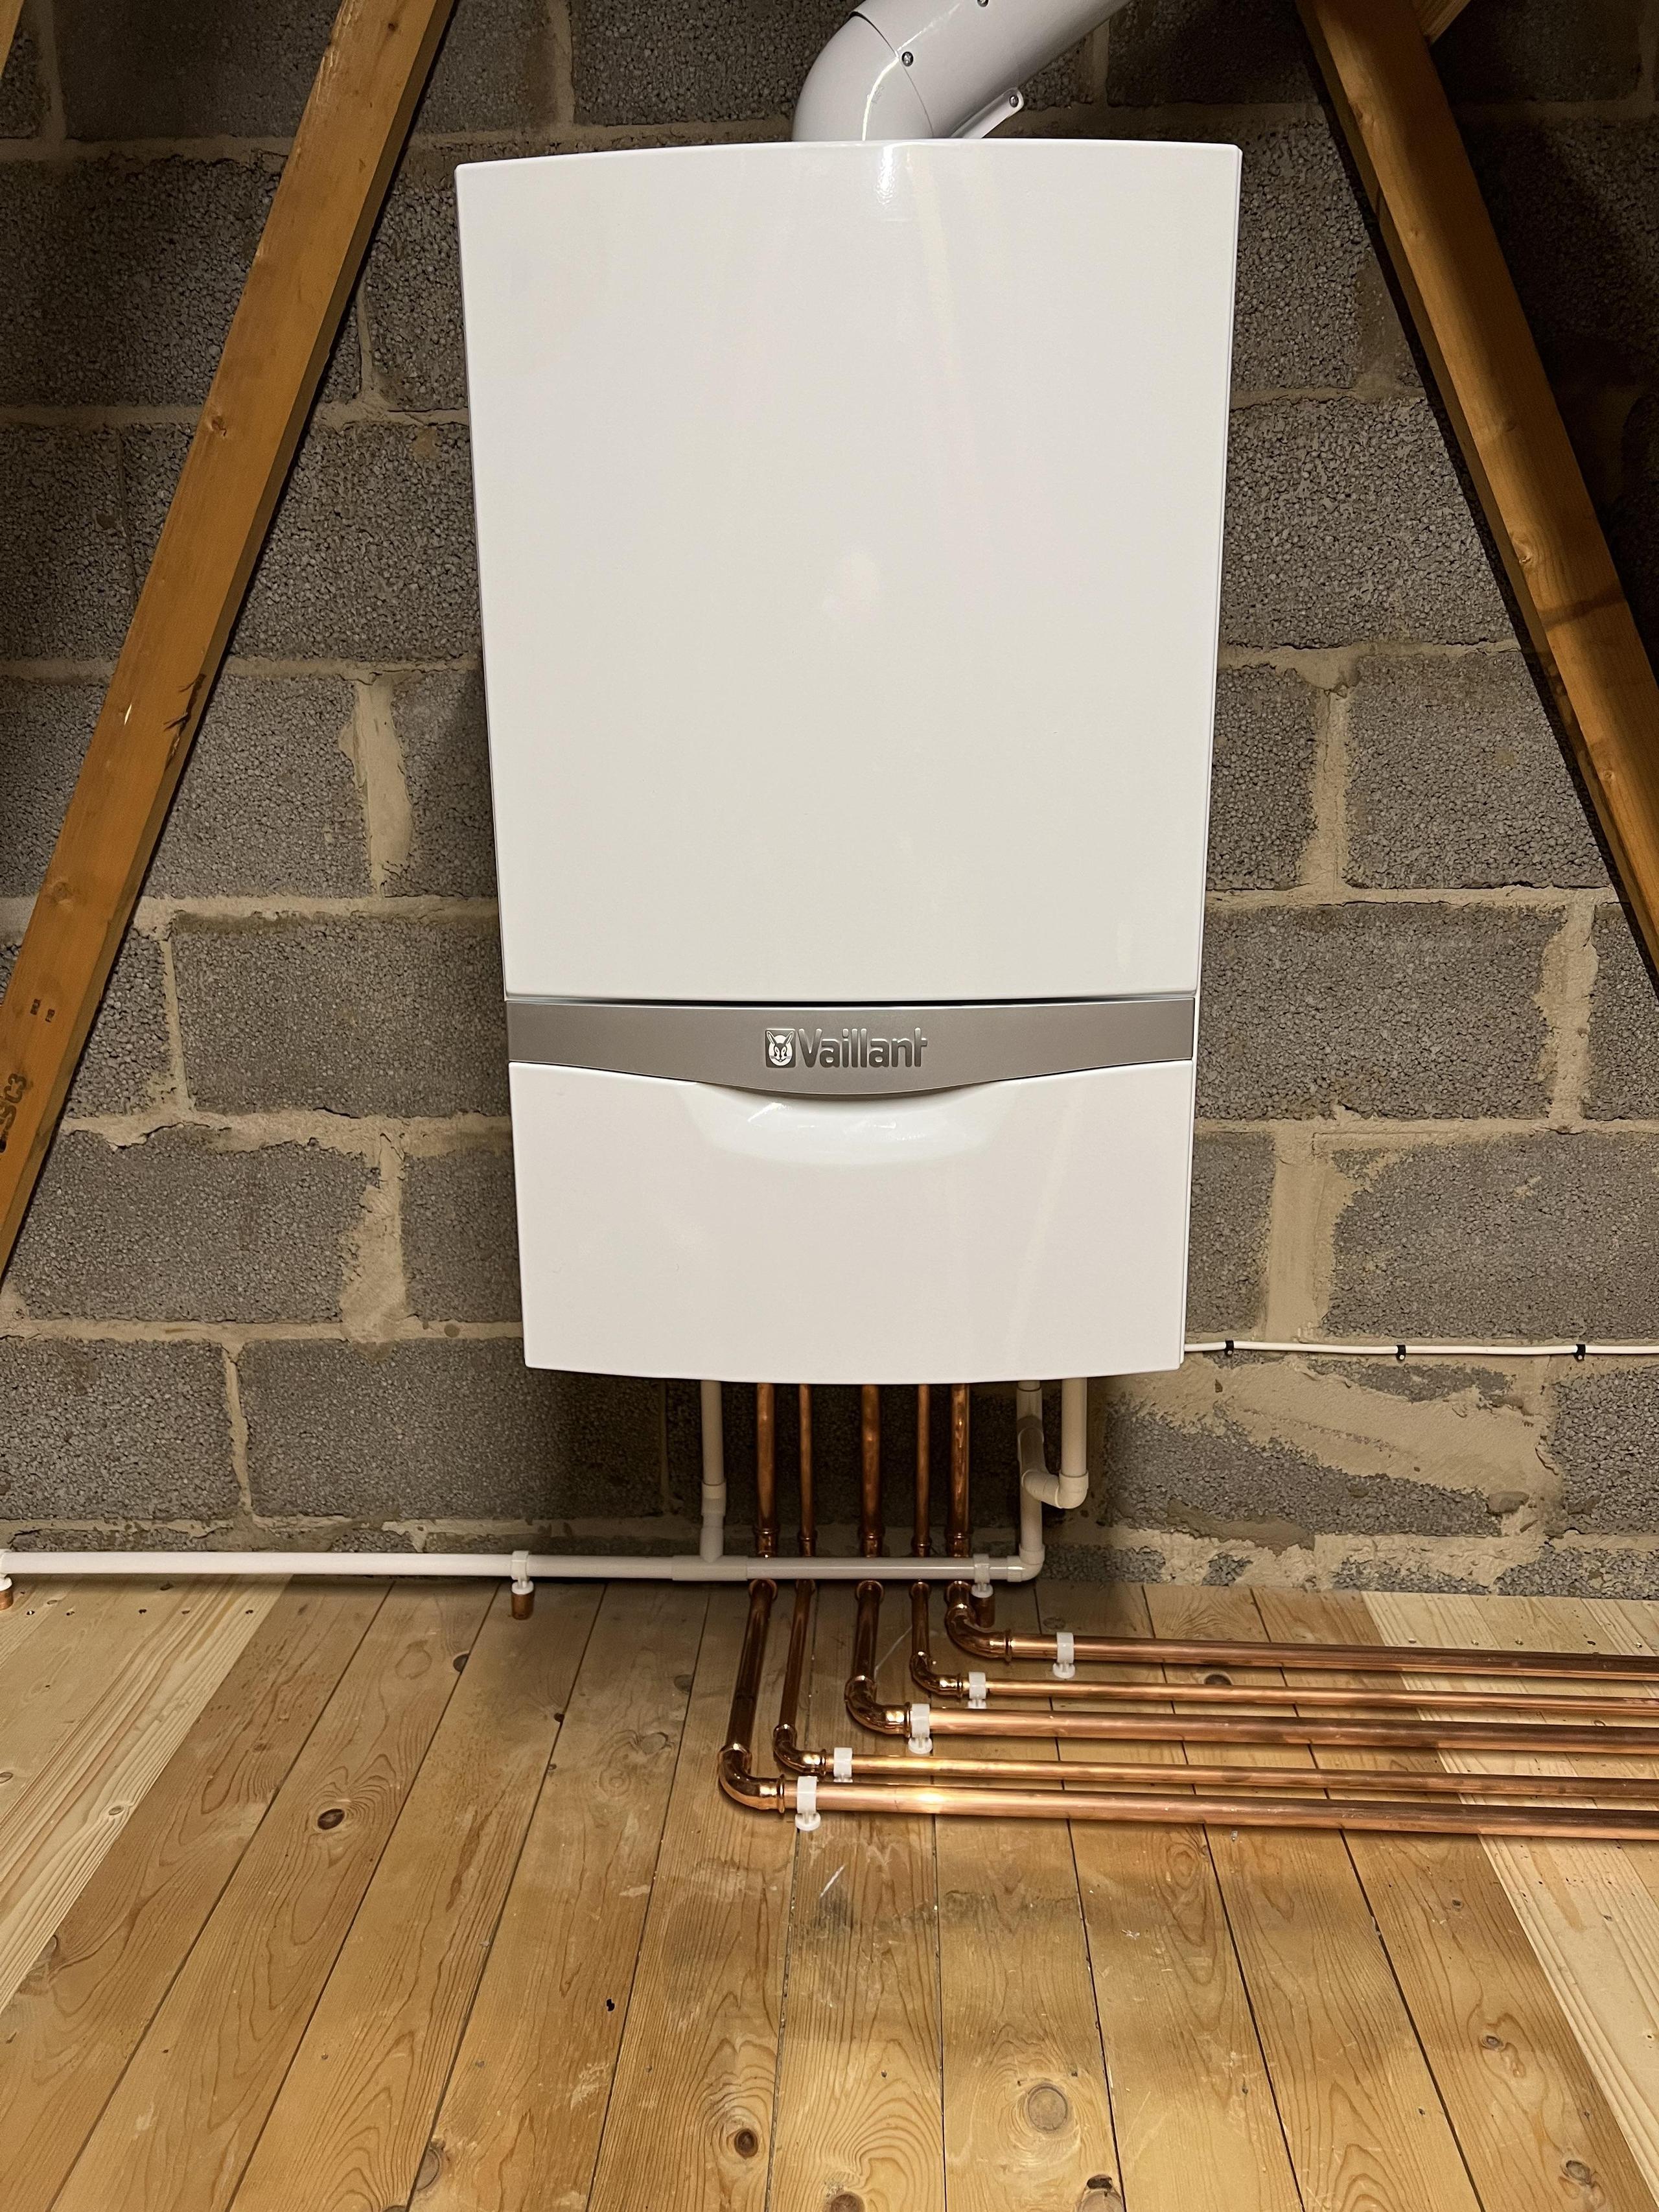 A Loverly Vaillant 938 Combi Store